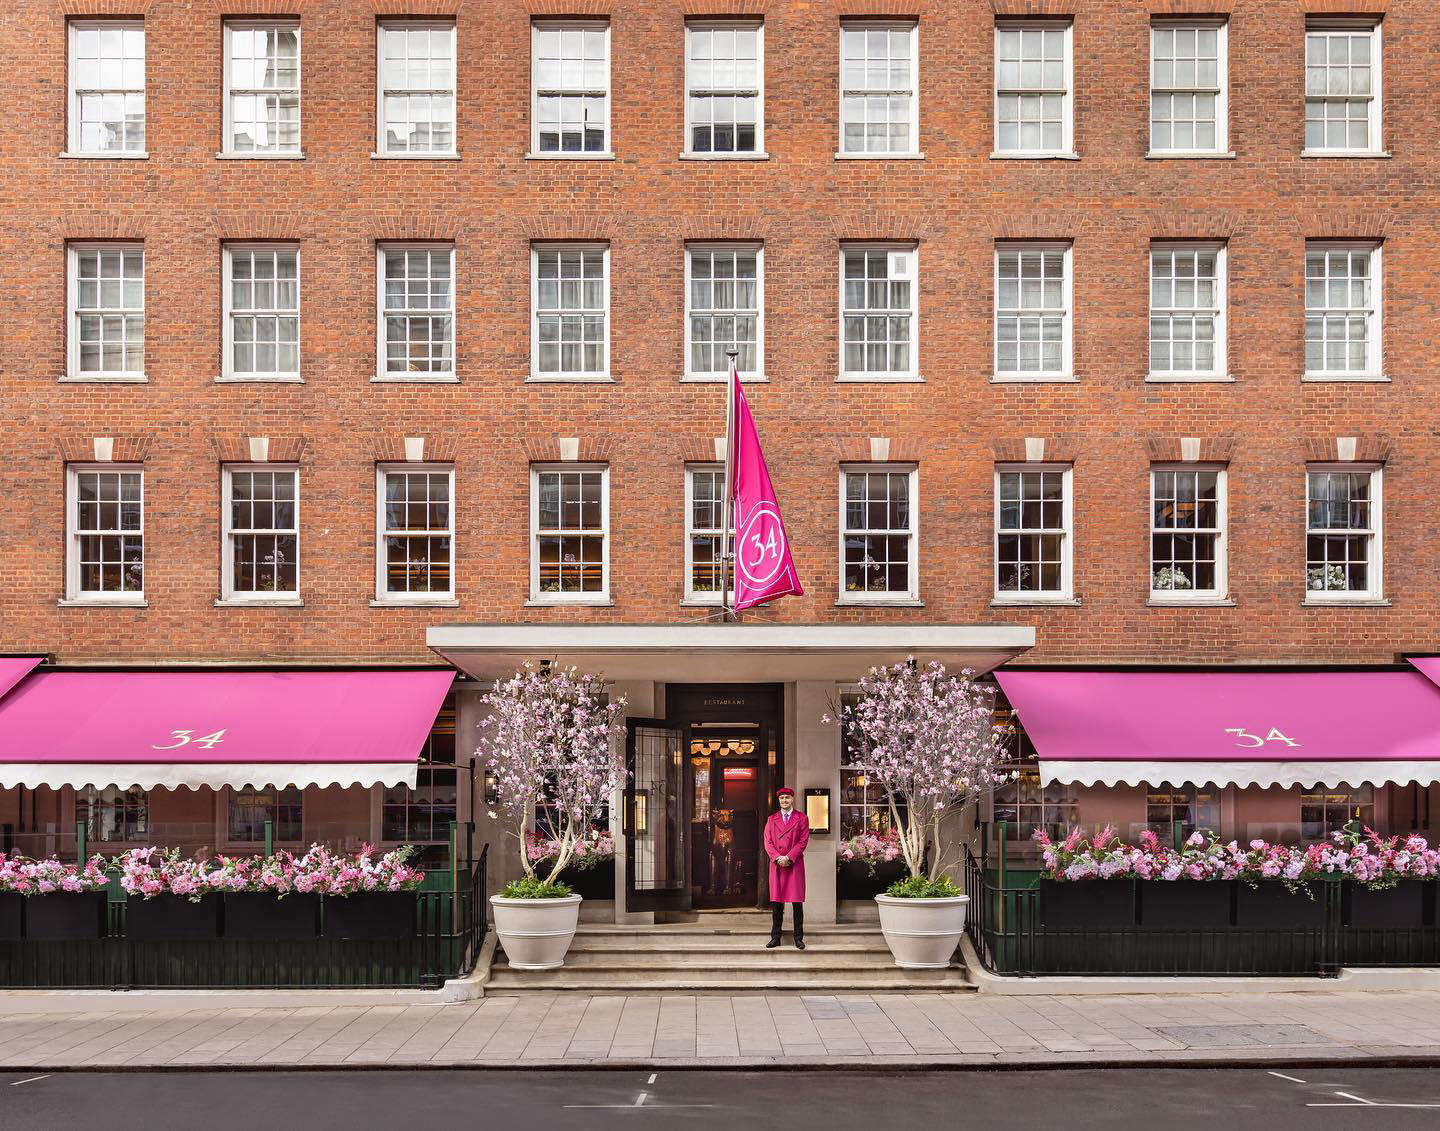 Wander through Grosvenor Square this Spring to find our rosy pink awning atop a ravishing terrace di